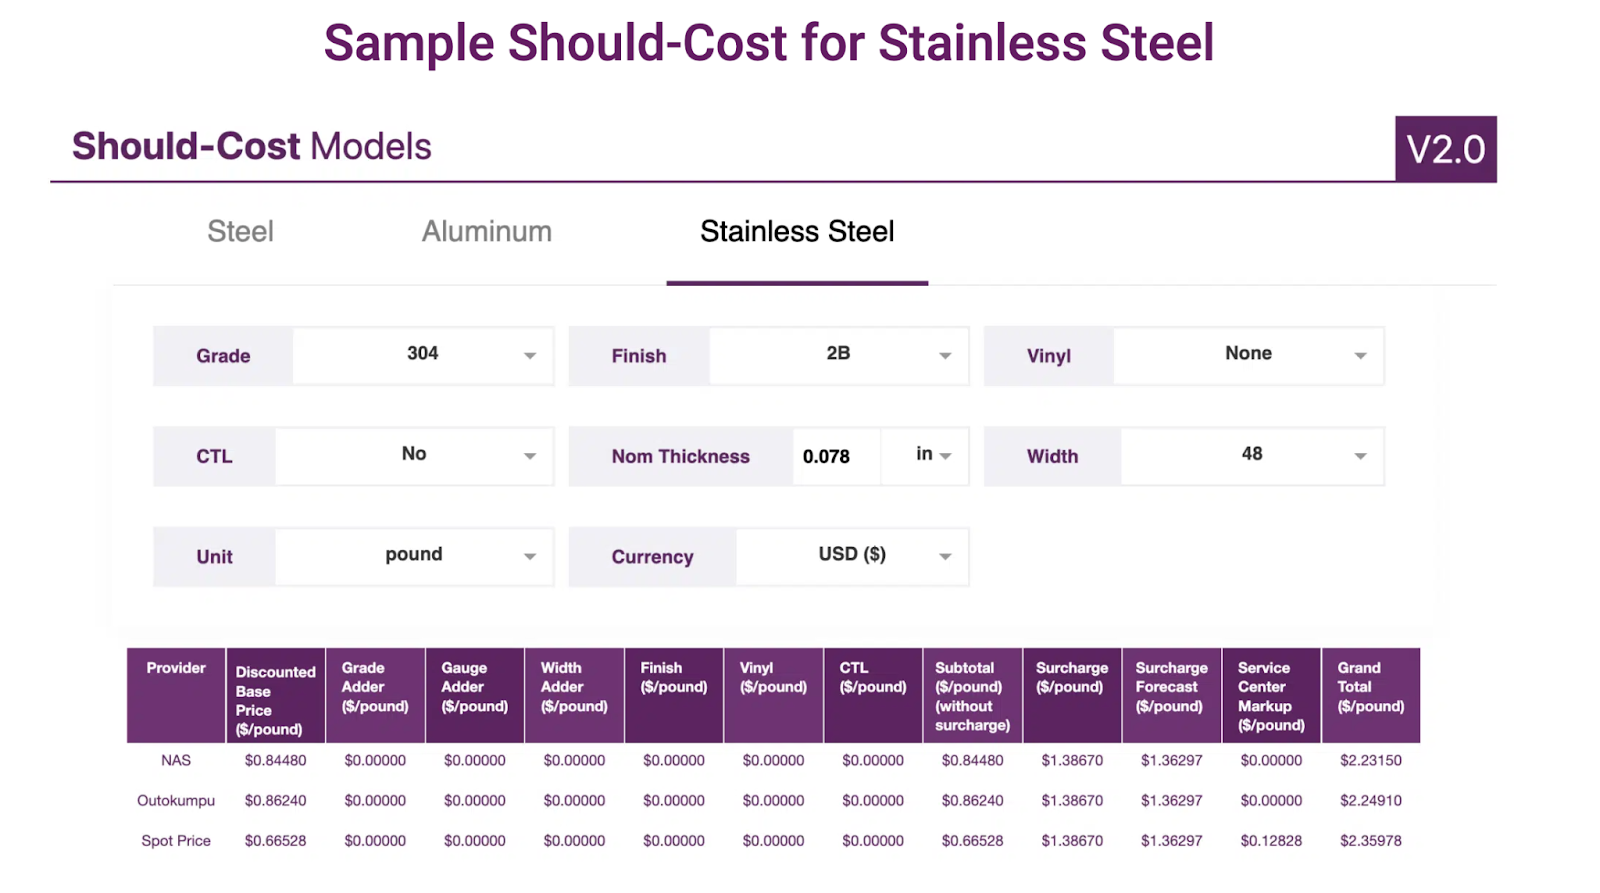 Stainless should-cost model